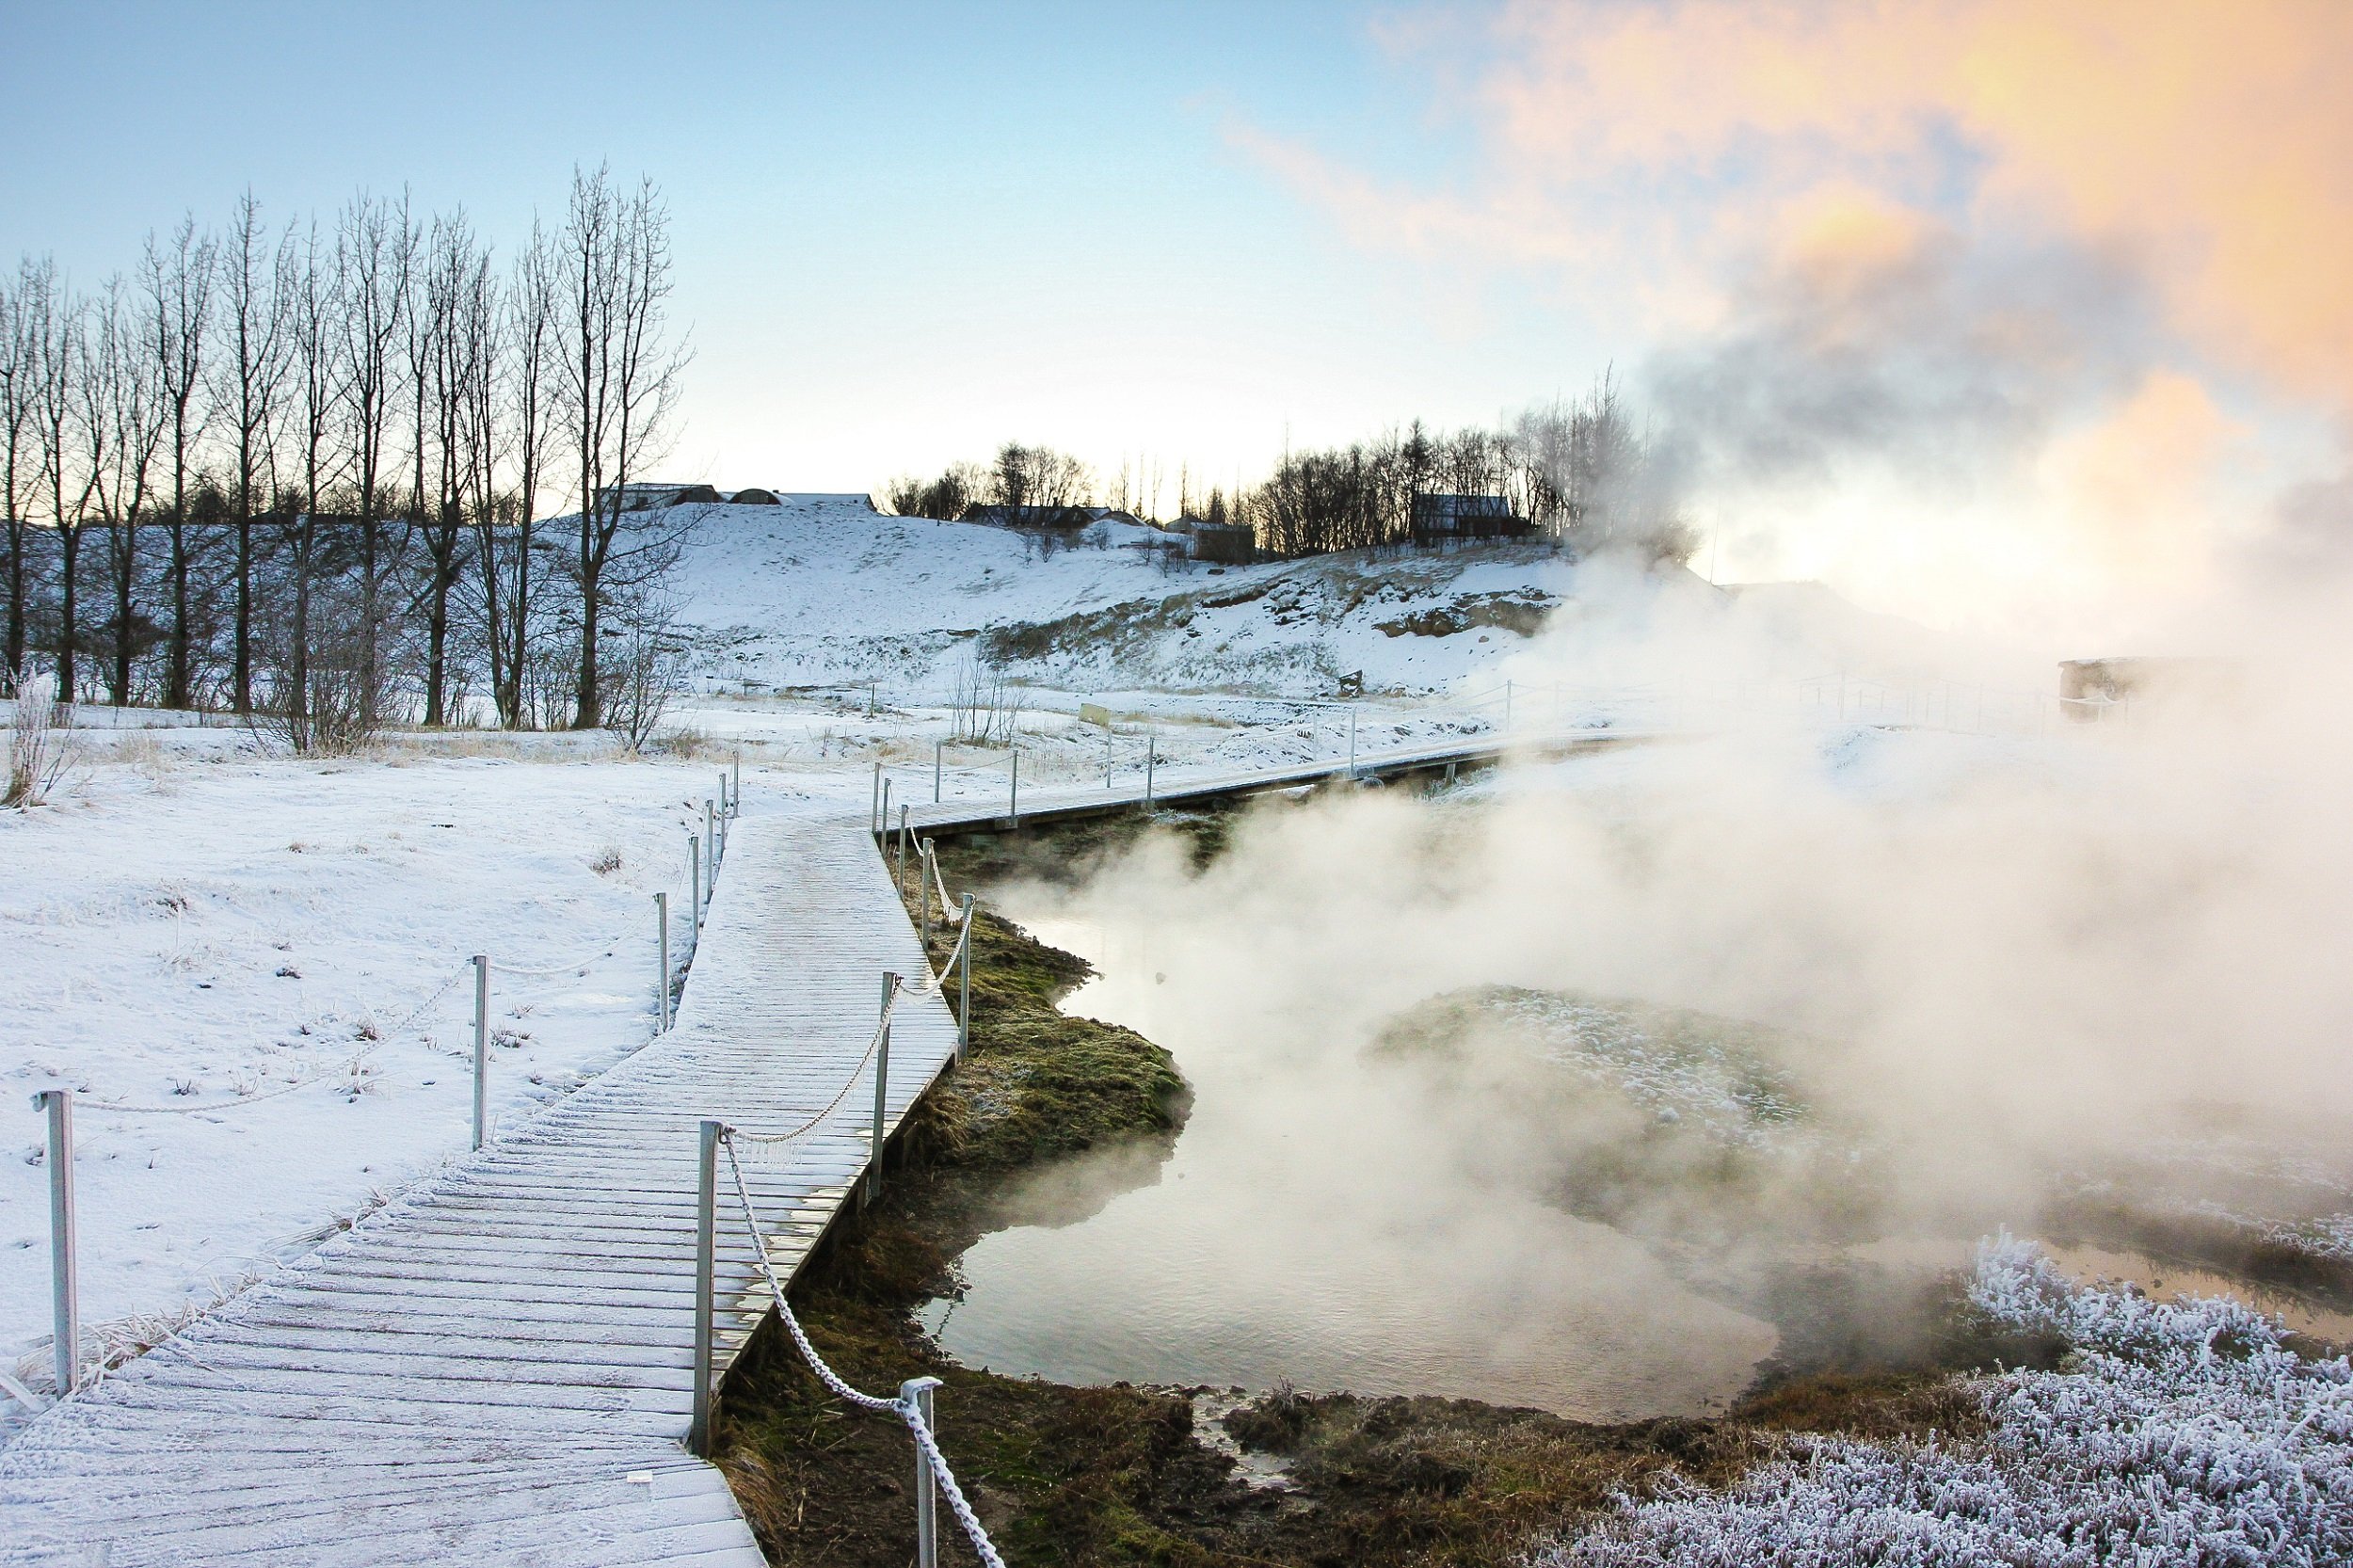 Best-of-iceland-8-day-tour-package-7